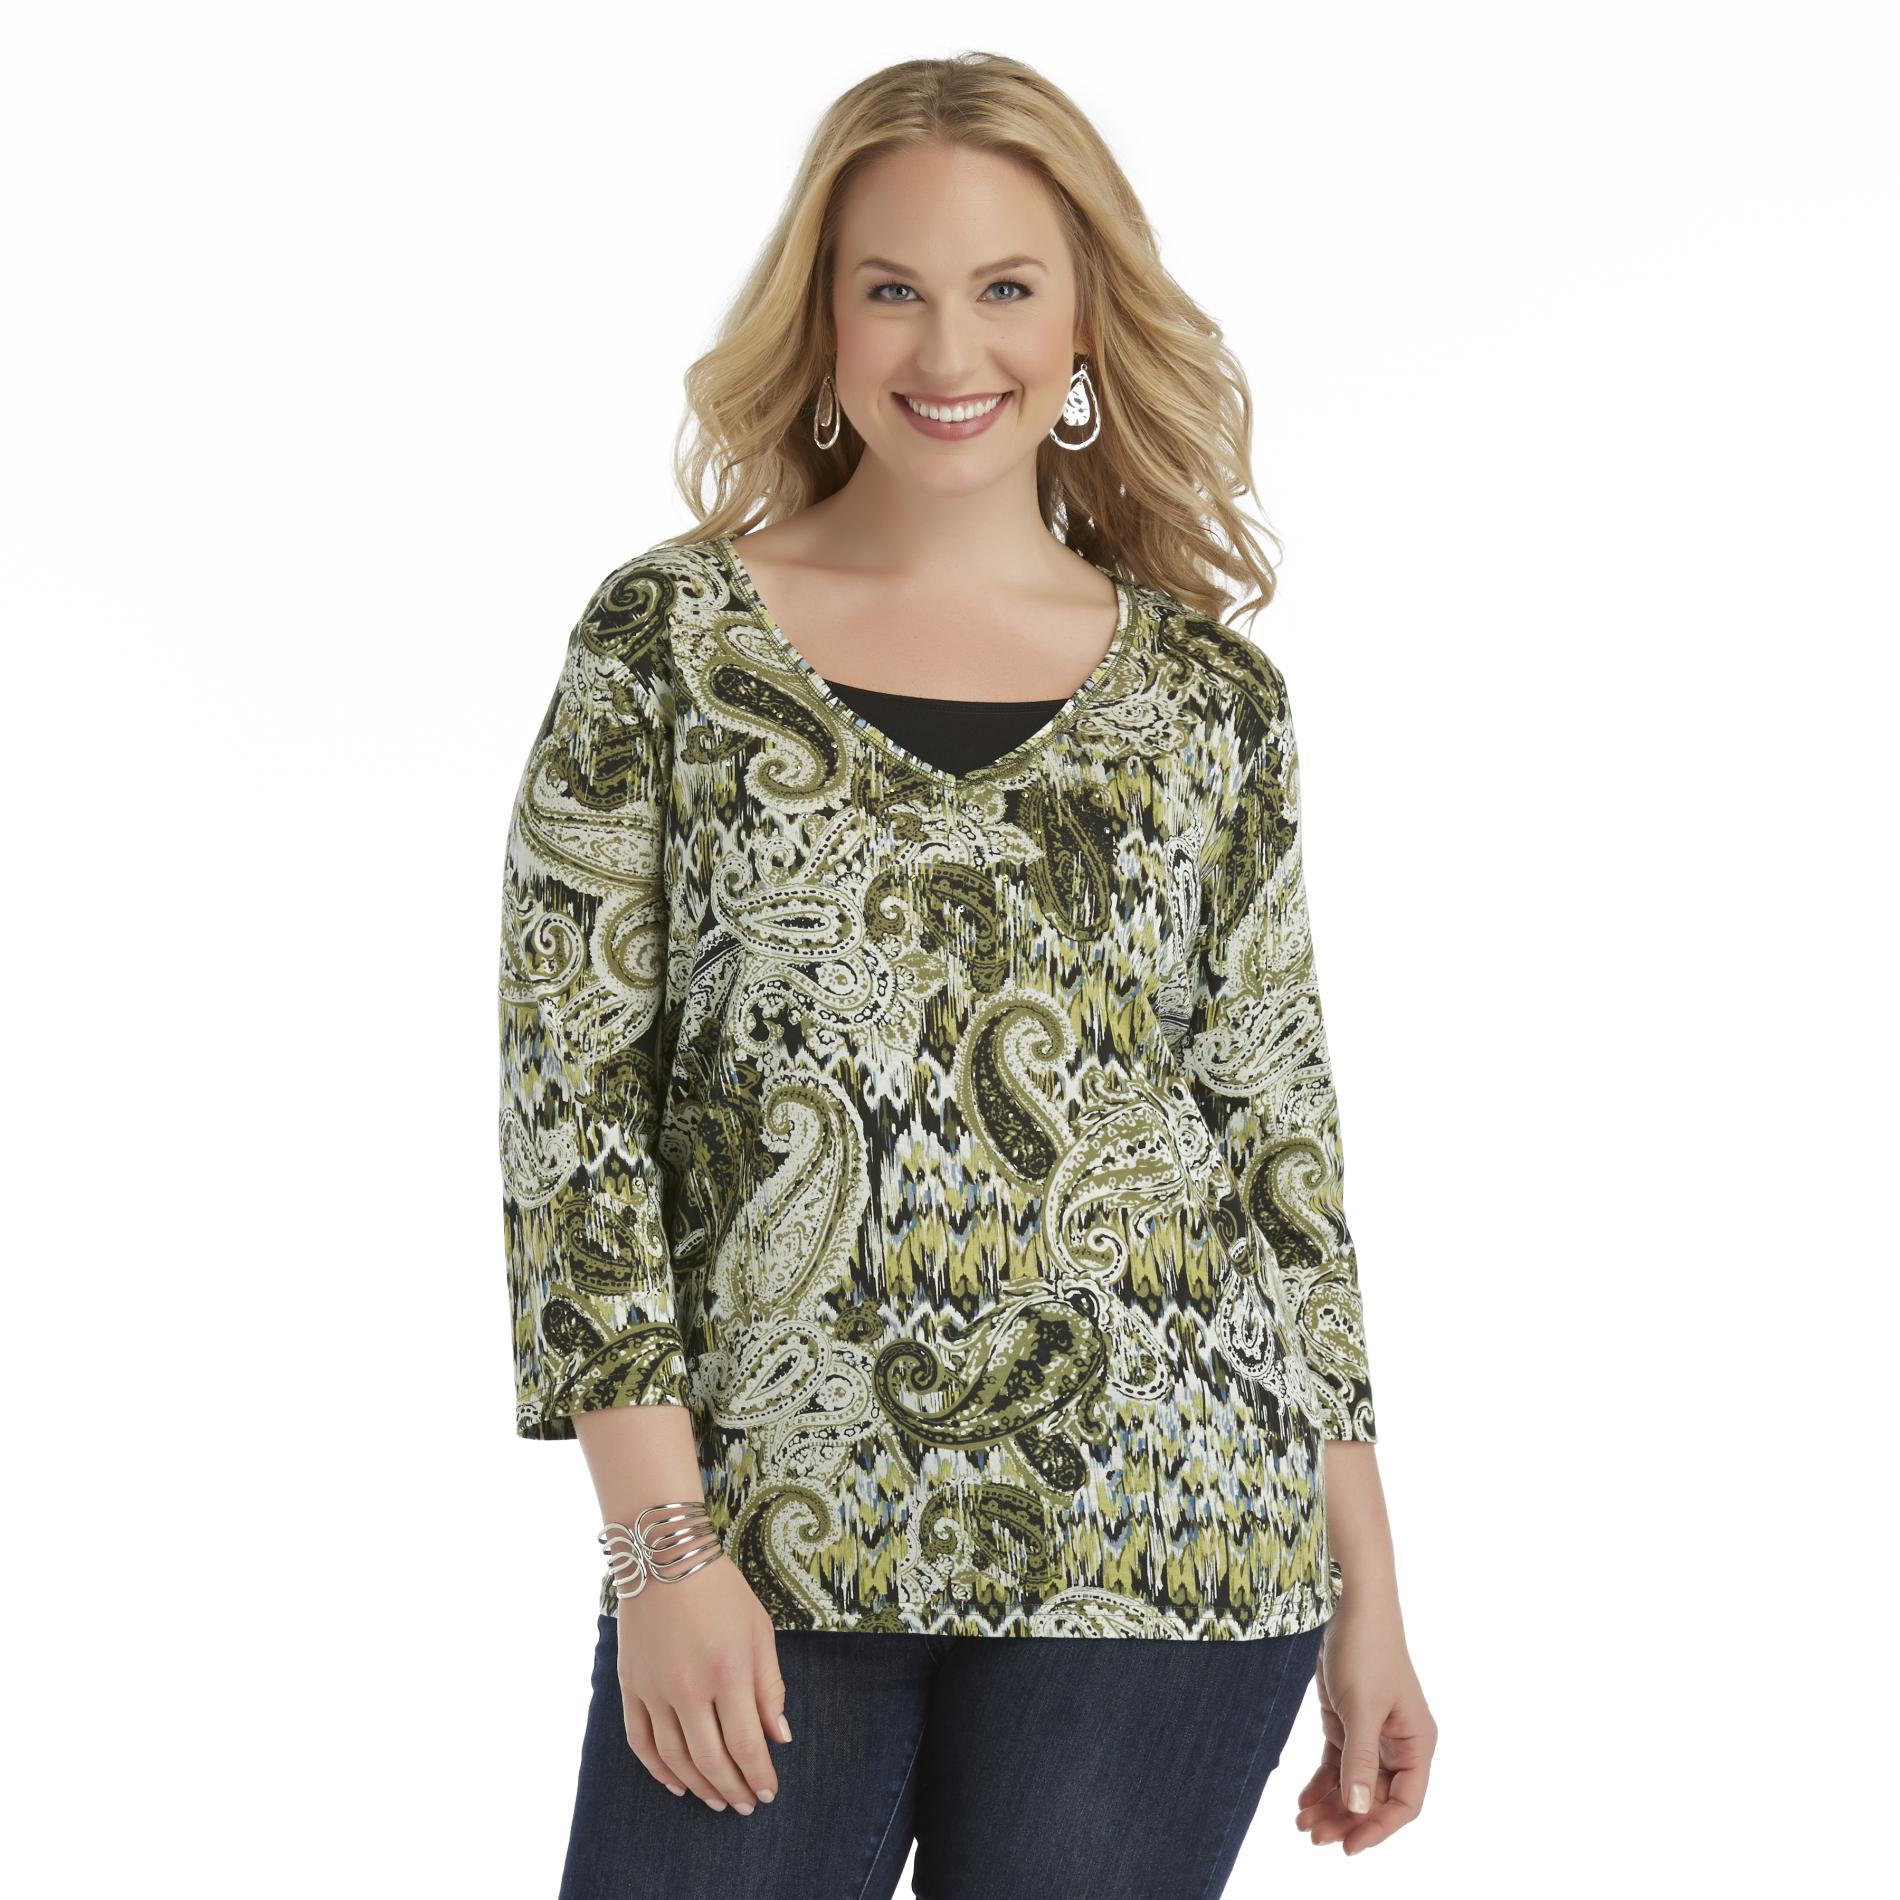 Basic Editions Women's Plus Printed Knit Top - Abstract Paisley